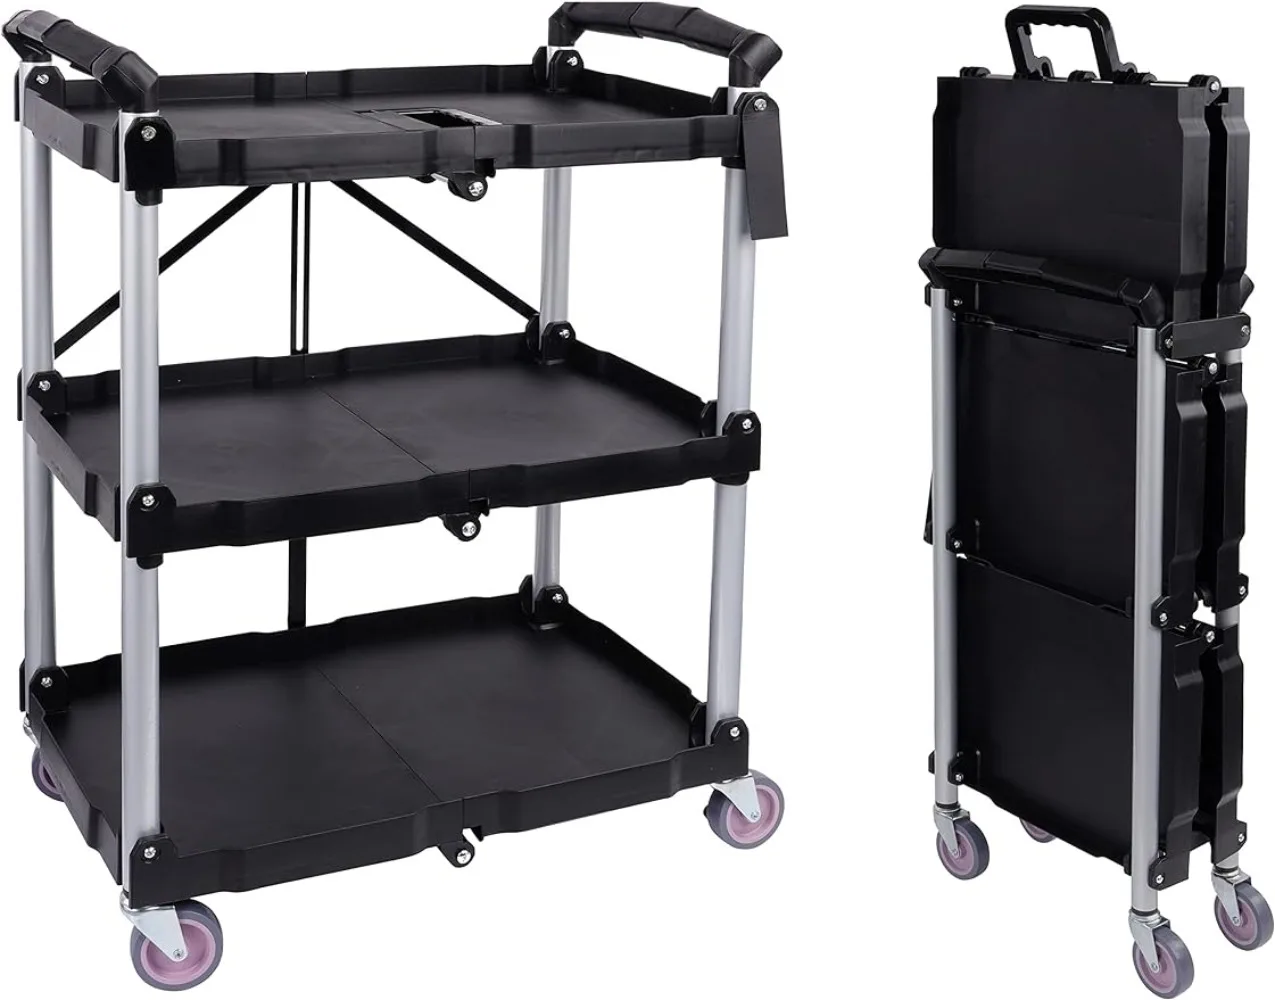 Portable-Folding-Collapsible-Service-Cart-Foldable-Service-Cart-3-Tier-Collapsible-Push-Cart-Folding-Utility-Carts